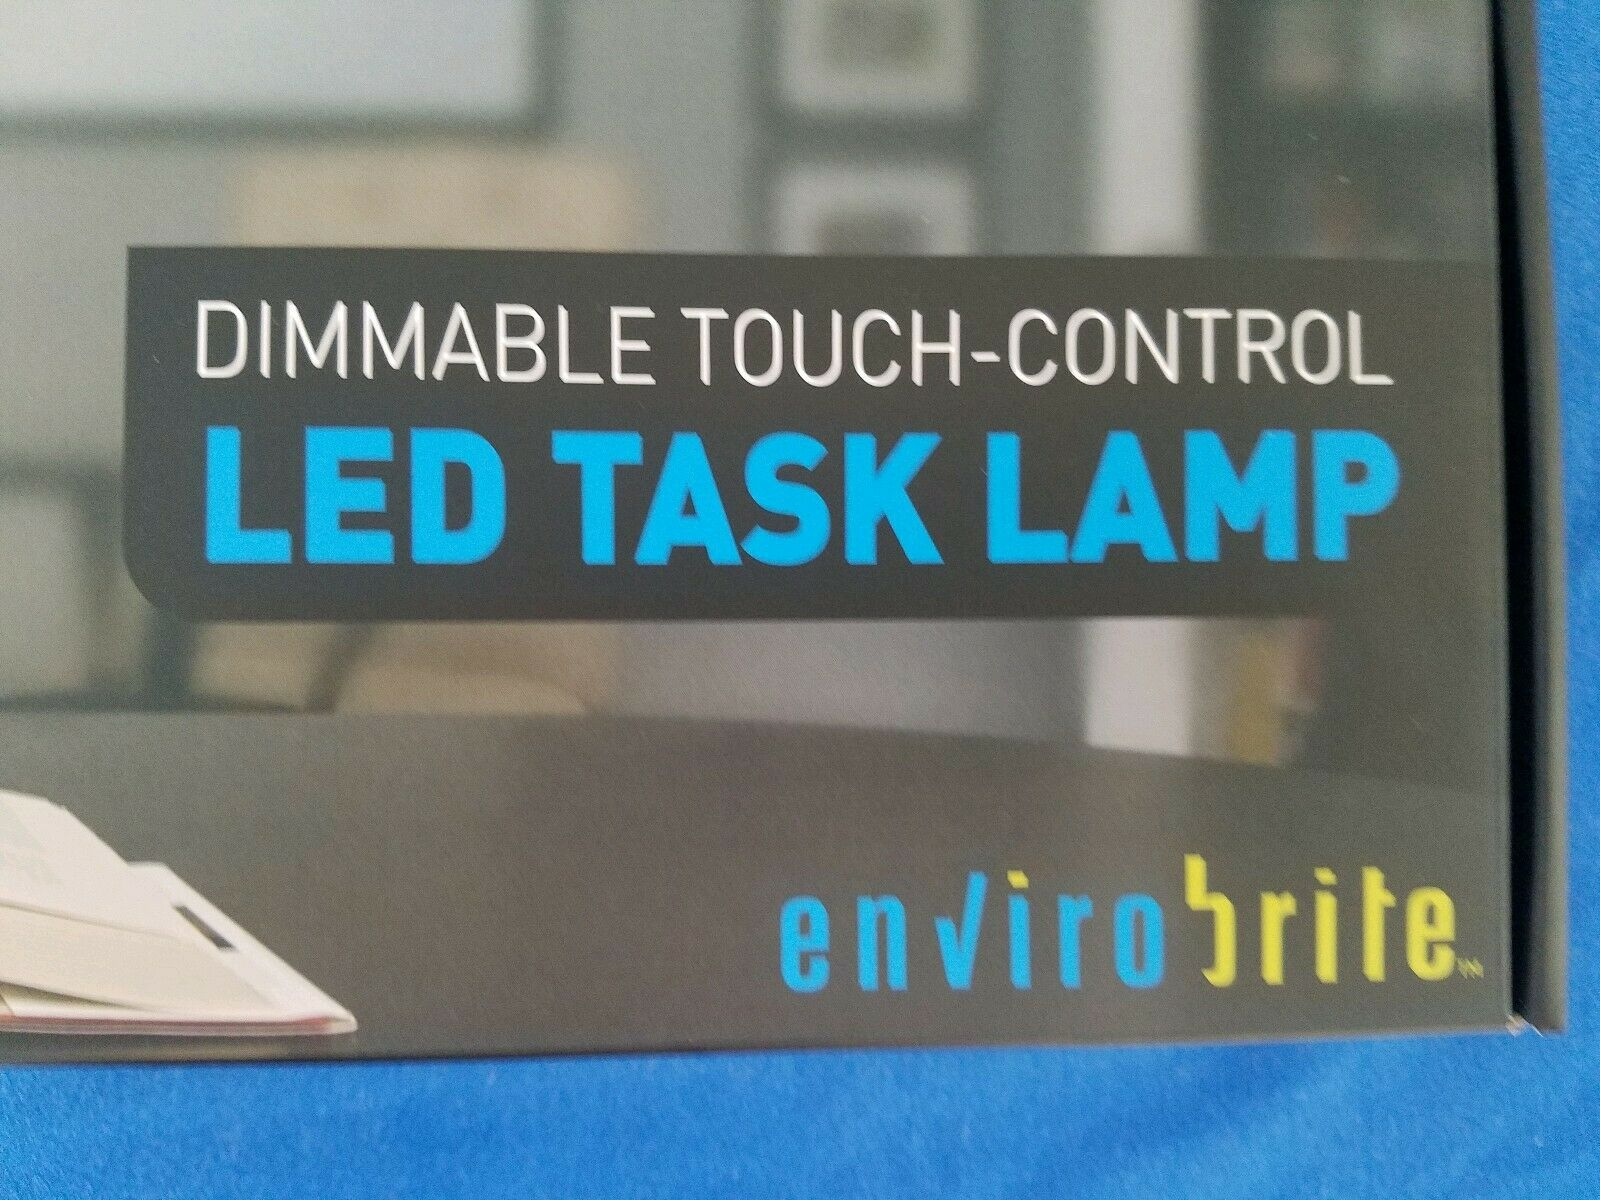 Envirobrite Led Dimmable Touch Control Desktop Task Lamp W Timer Usb Charging with regard to size 1600 X 1200